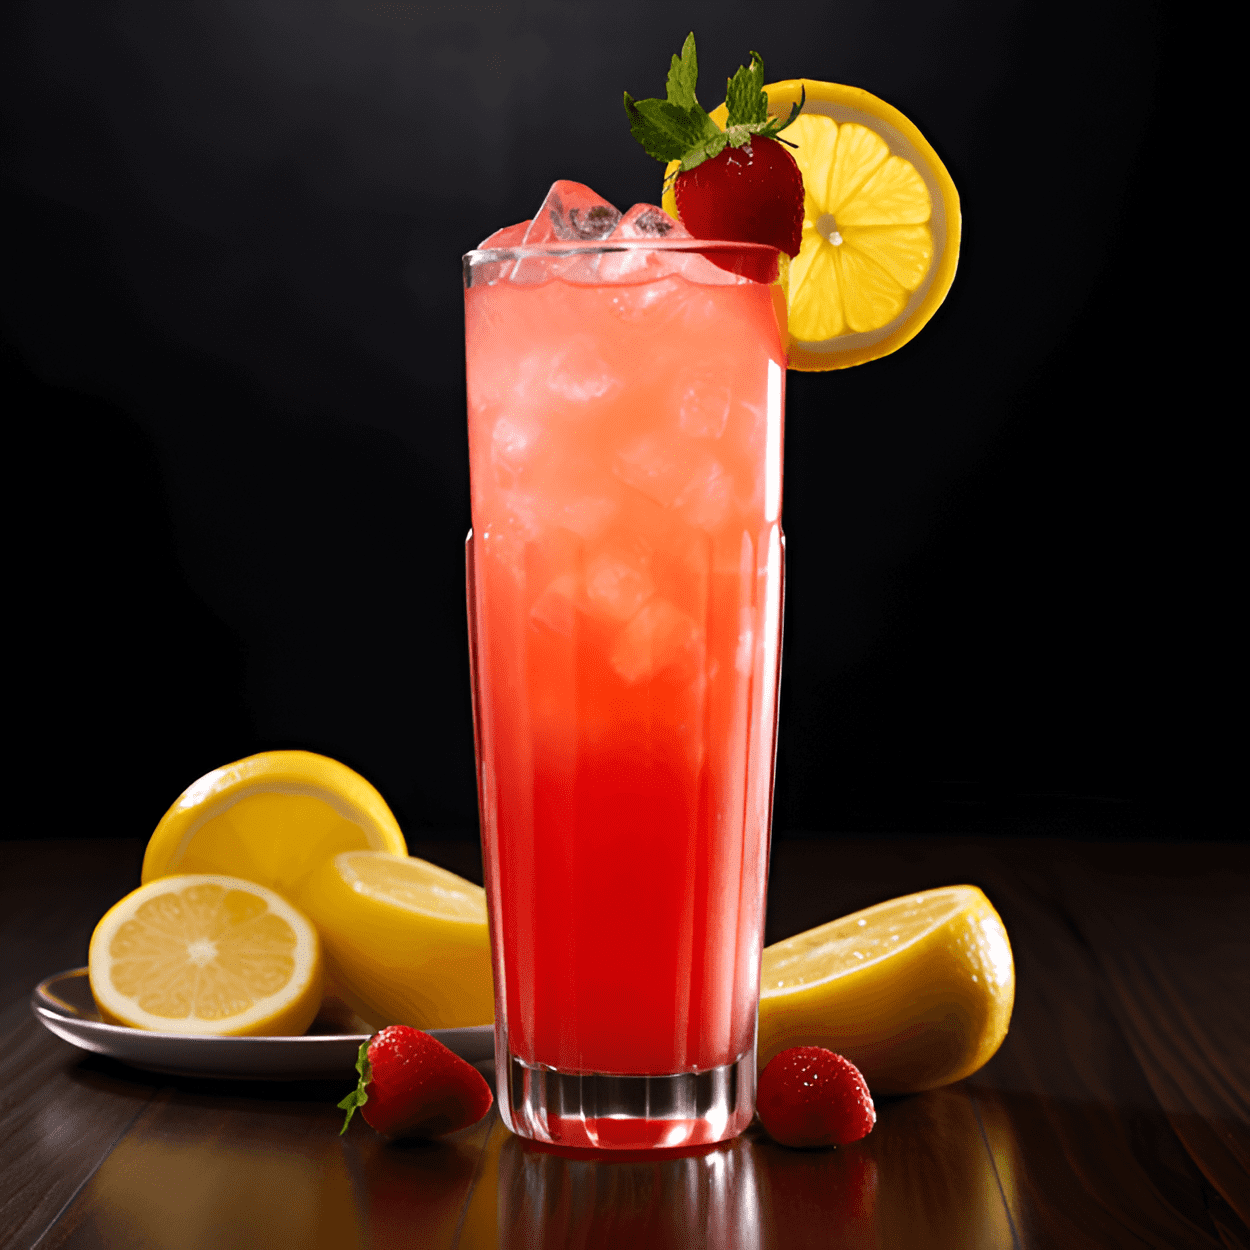 Jamaican Me Happy Cocktail Recipe - The Jamaican Me Happy cocktail has a sweet, fruity taste with a hint of tartness. The combination of lemon, strawberry, watermelon and guava flavors creates a refreshing and tropical taste sensation that is light and enjoyable.